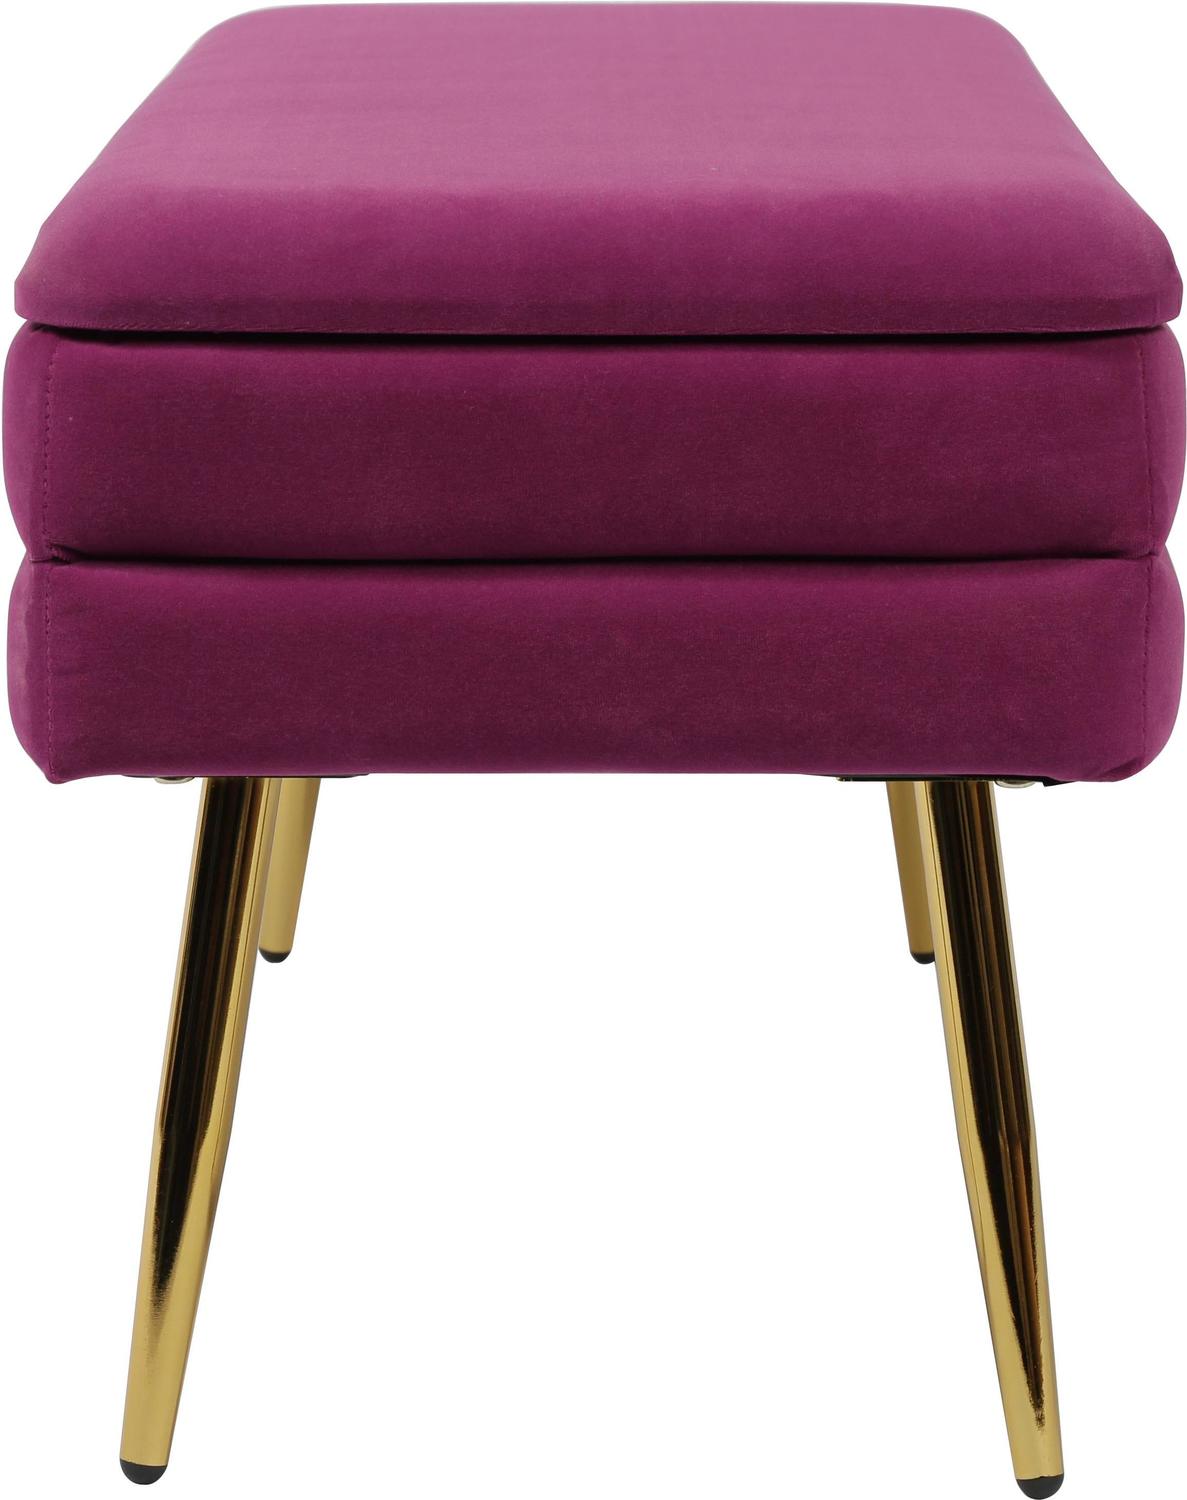 accent chair upholstered chairs Tov Furniture Benches Plum